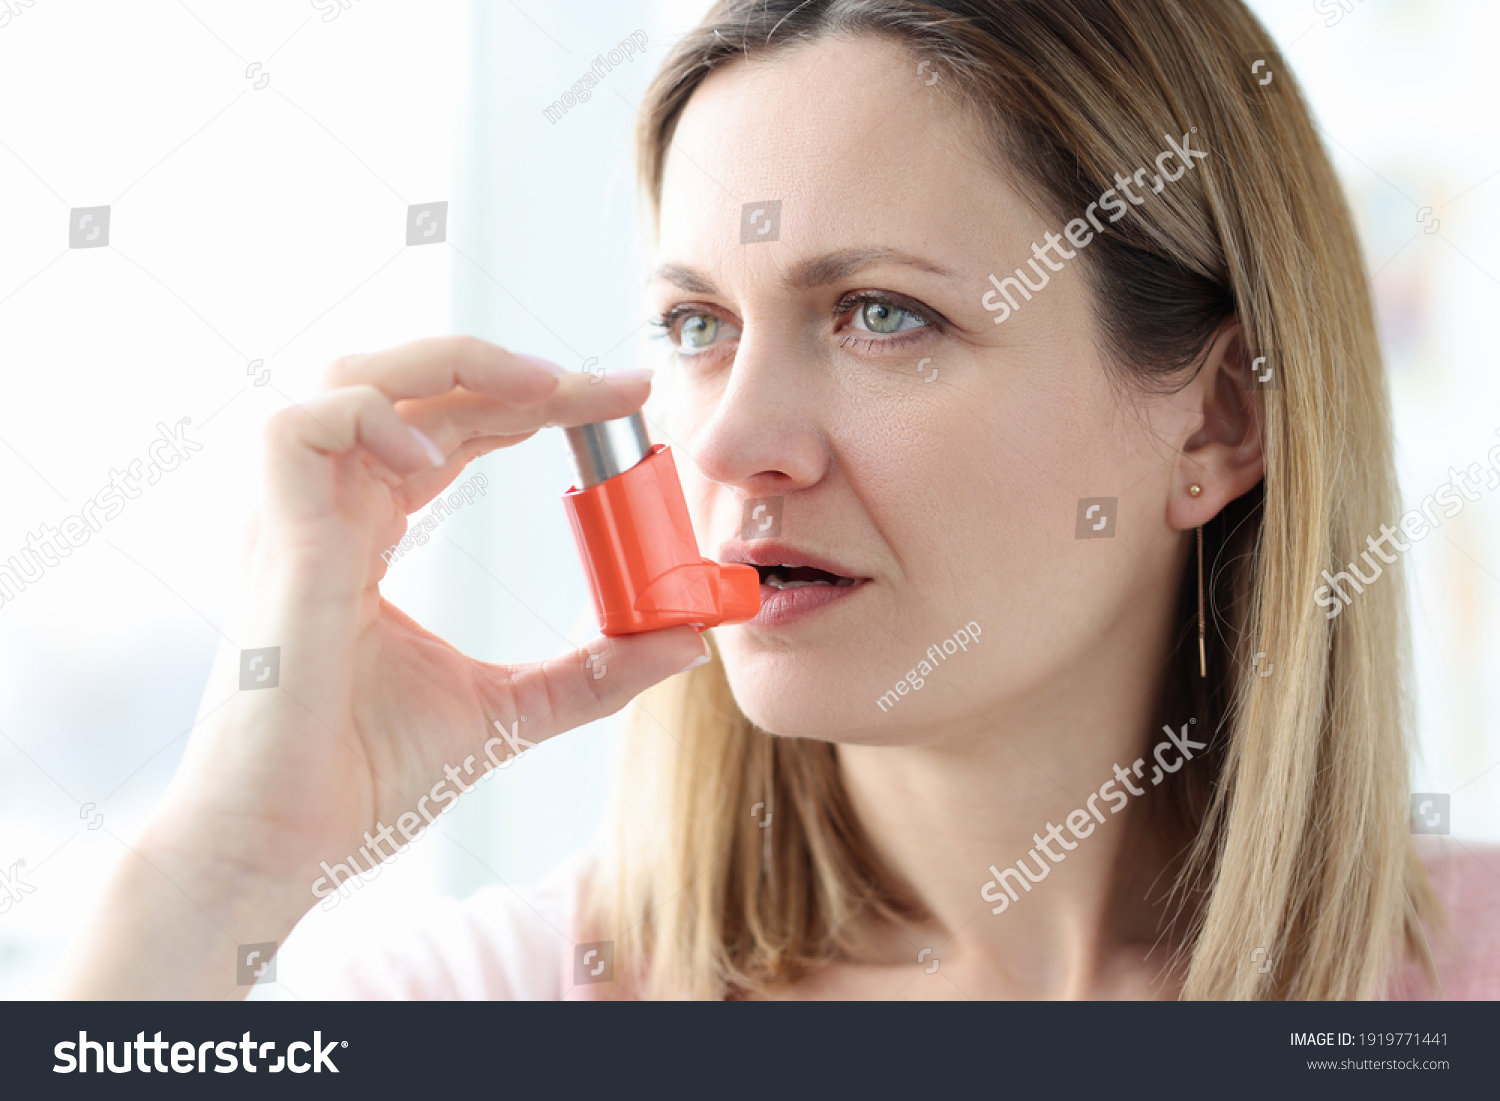 Sick woman holding hormone inhaler near mouth. Treatment of bronchial asthma concept #1919771441